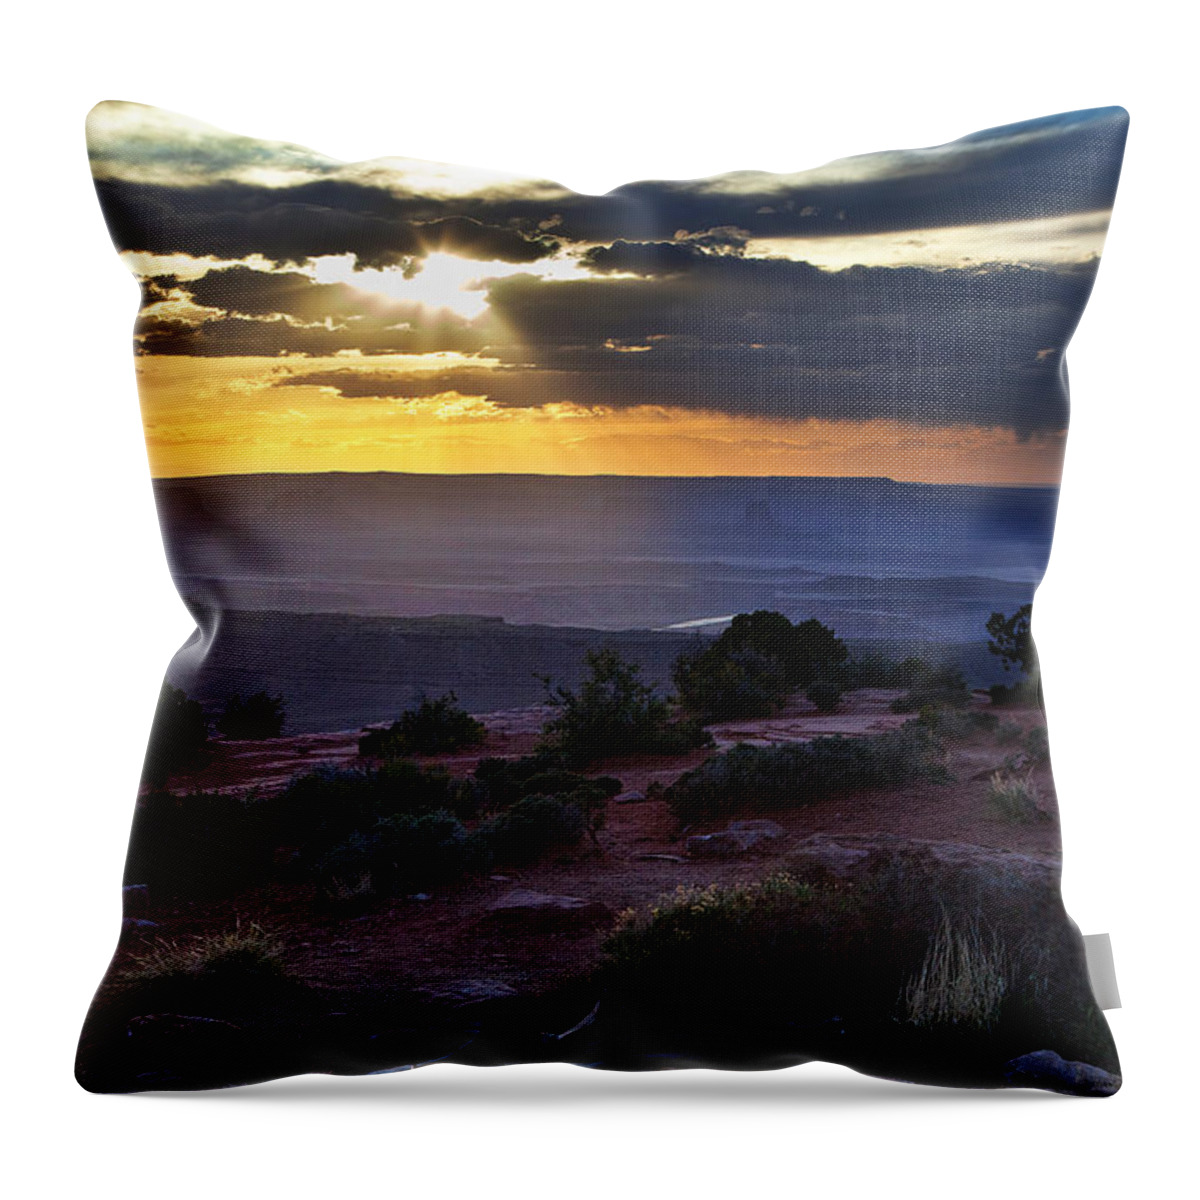 Utah Throw Pillow featuring the photograph Canyonlands Sunset by James Garrison